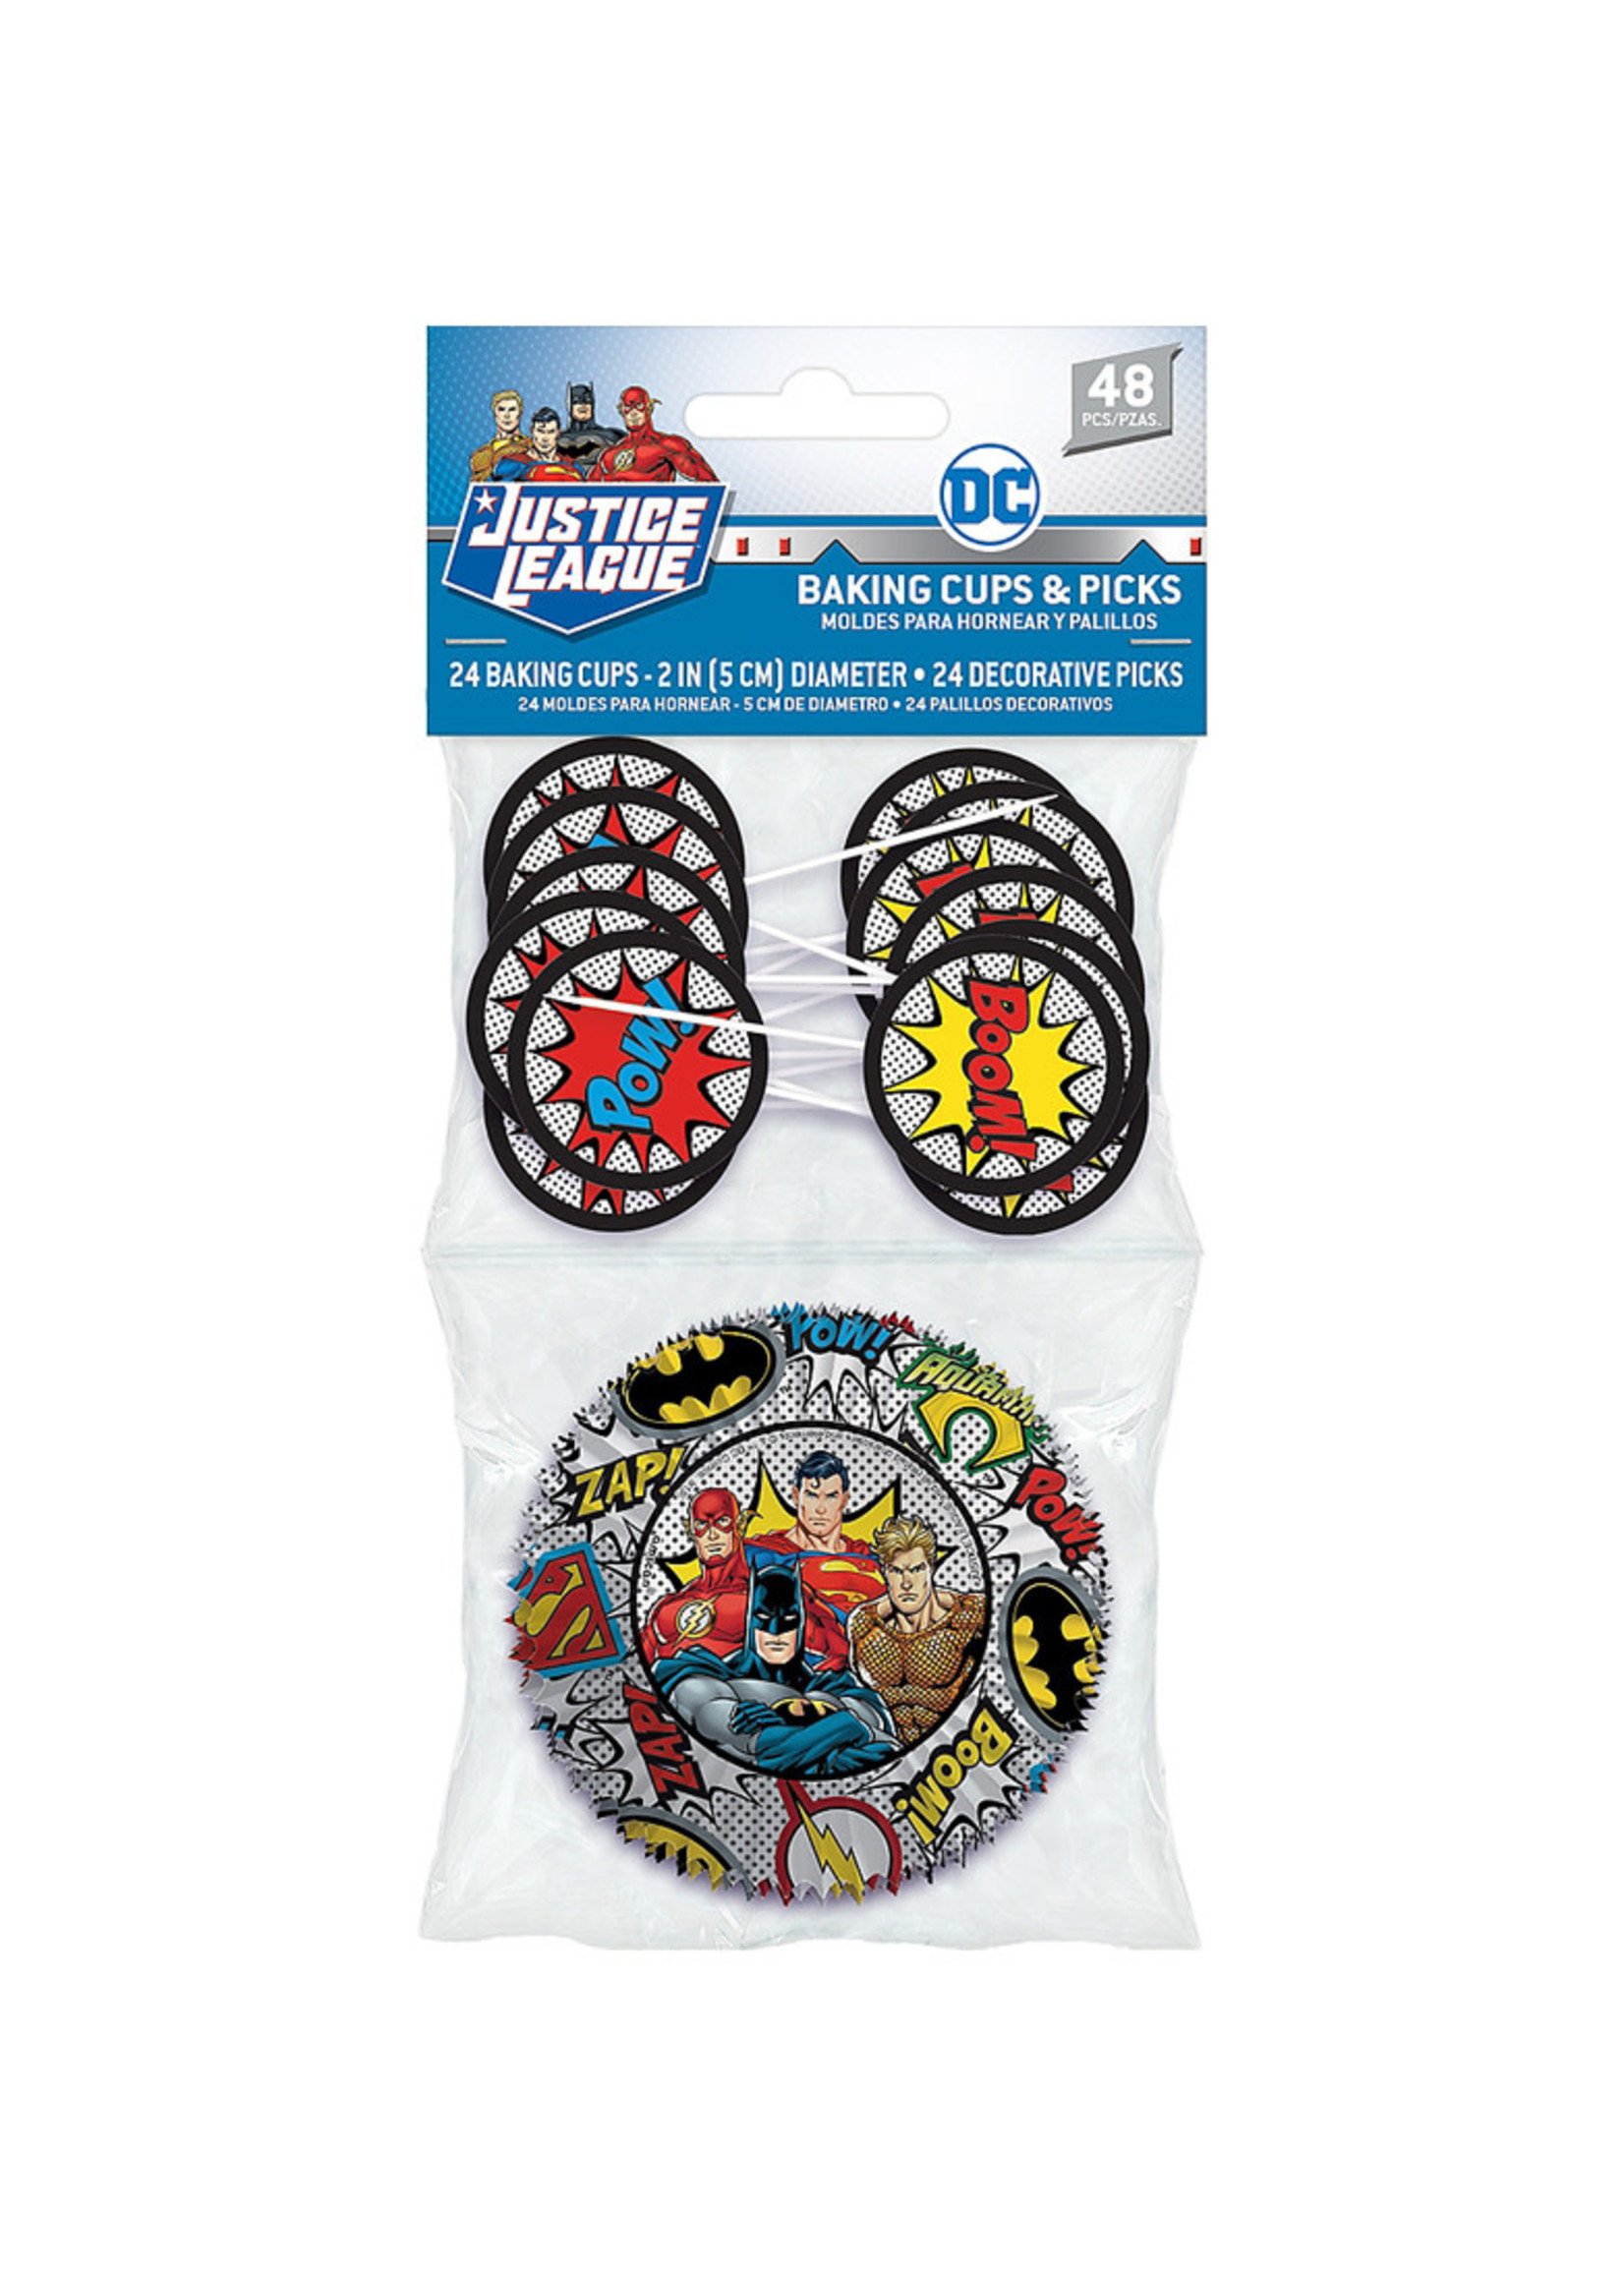 Justice League Heroes Unite Cupcake Decorating Kit for 24